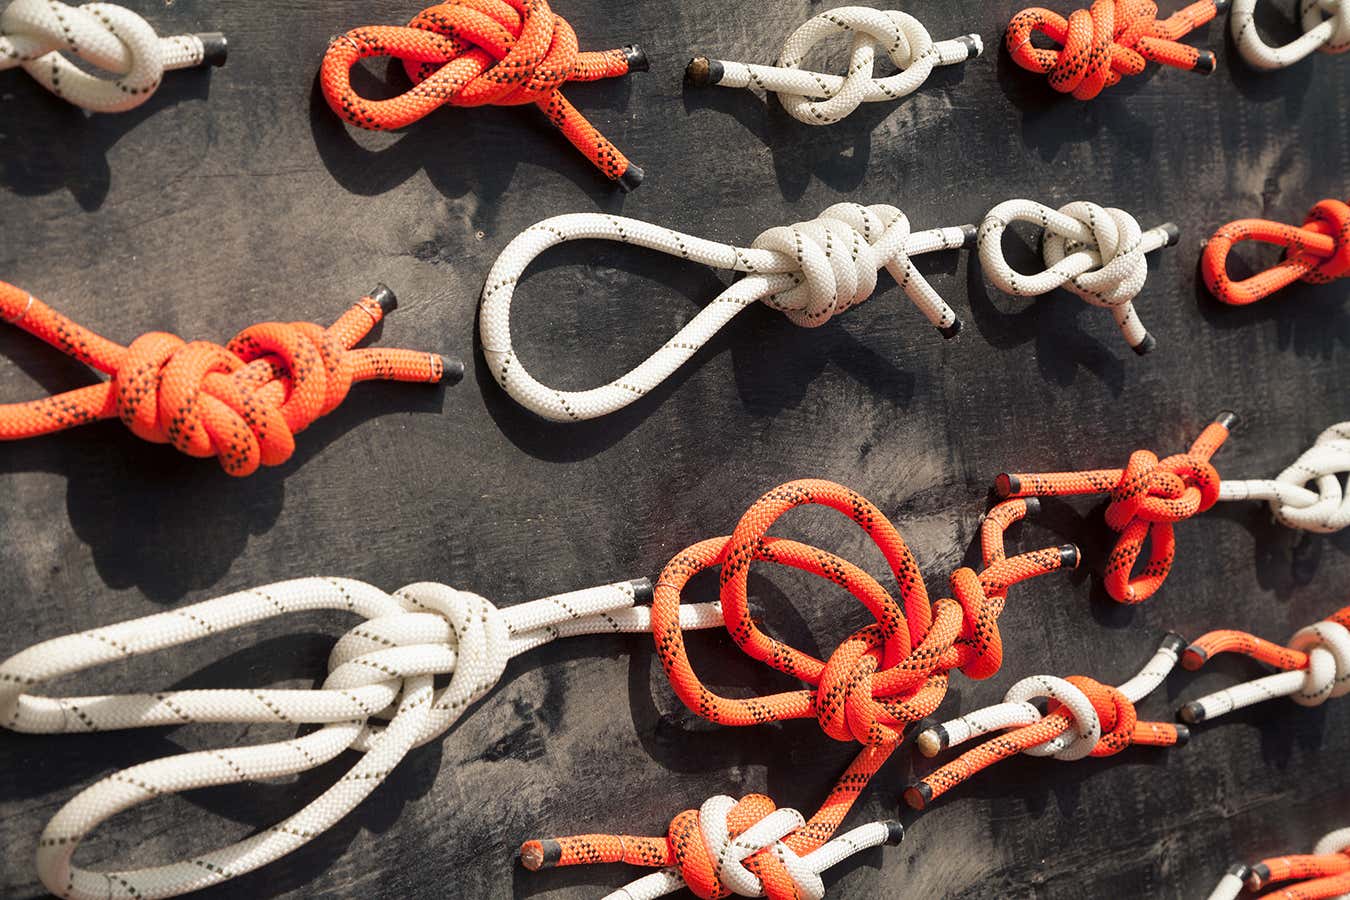 What the mathematics of knots reveals about the shape of the universe